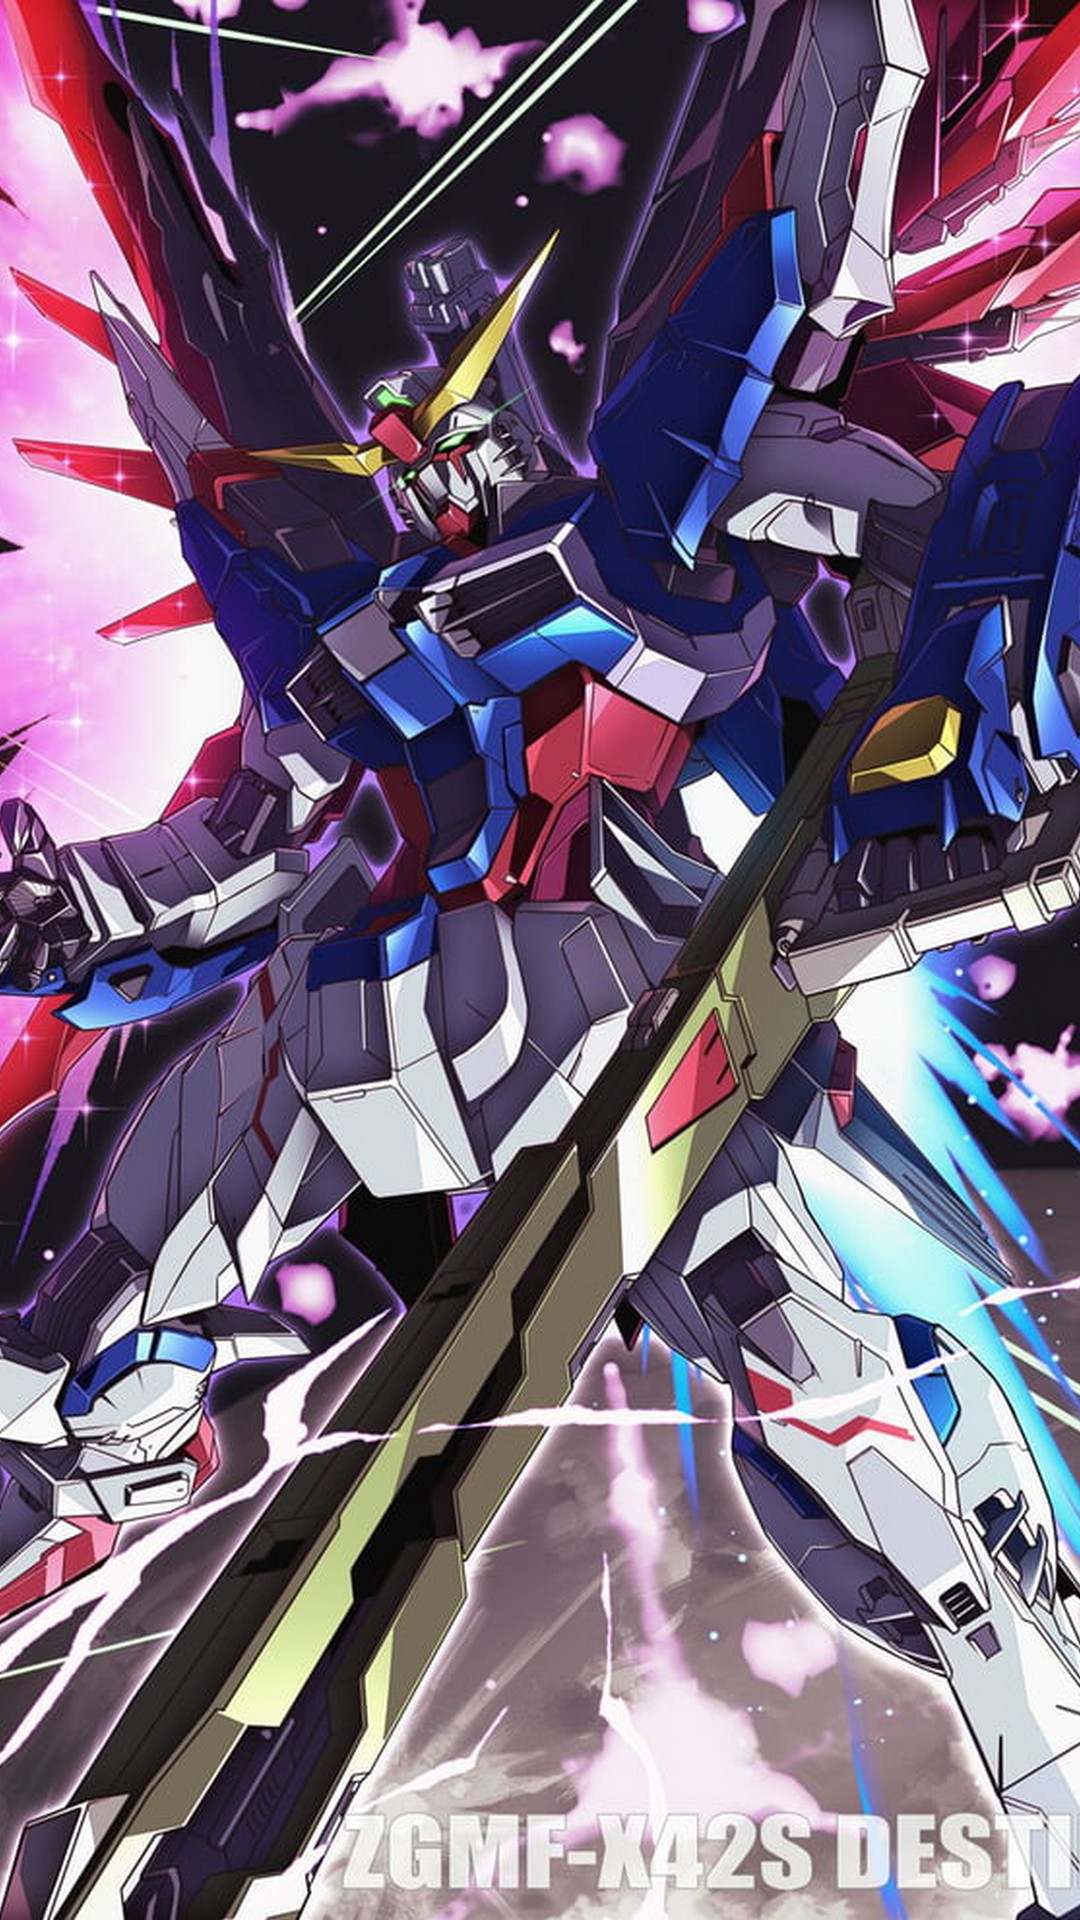 Gundam Wallpaper for iPhone with high-resolution 1080x1920 pixel. You can use this wallpaper for your iPhone 5, 6, 7, 8, X, XS, XR backgrounds, Mobile Screensaver, or iPad Lock Screen